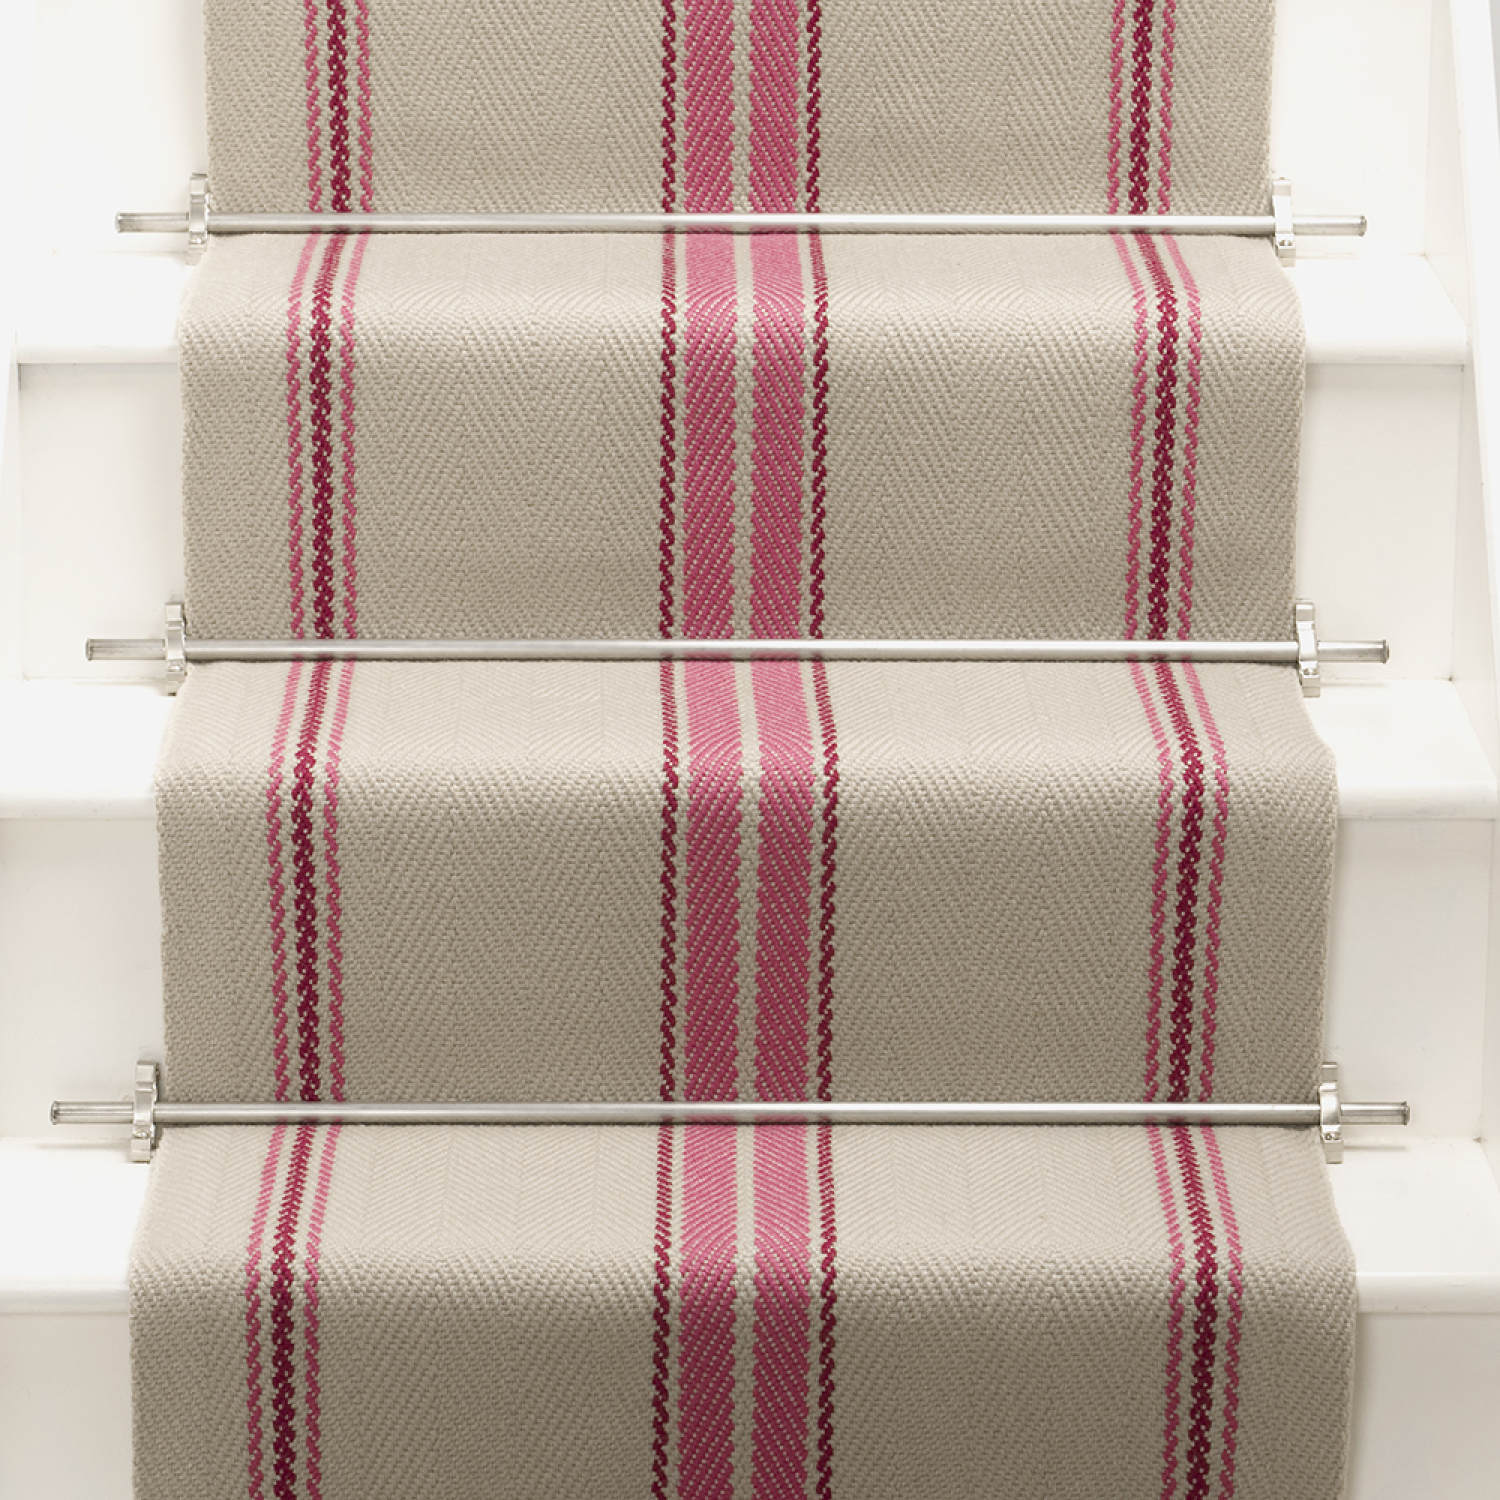 Cluny Raspberry stair runner by Roger Oates